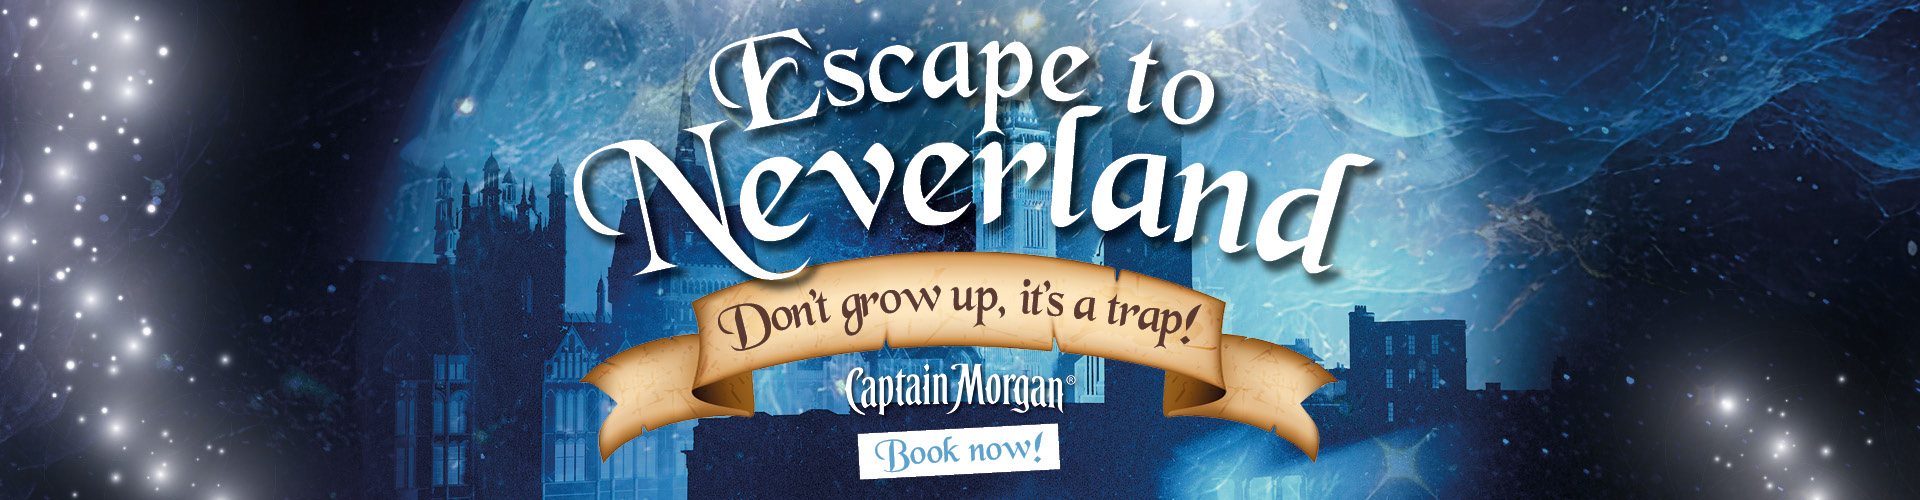 Escape to Neverland this NYE at Popworld London Watling Street